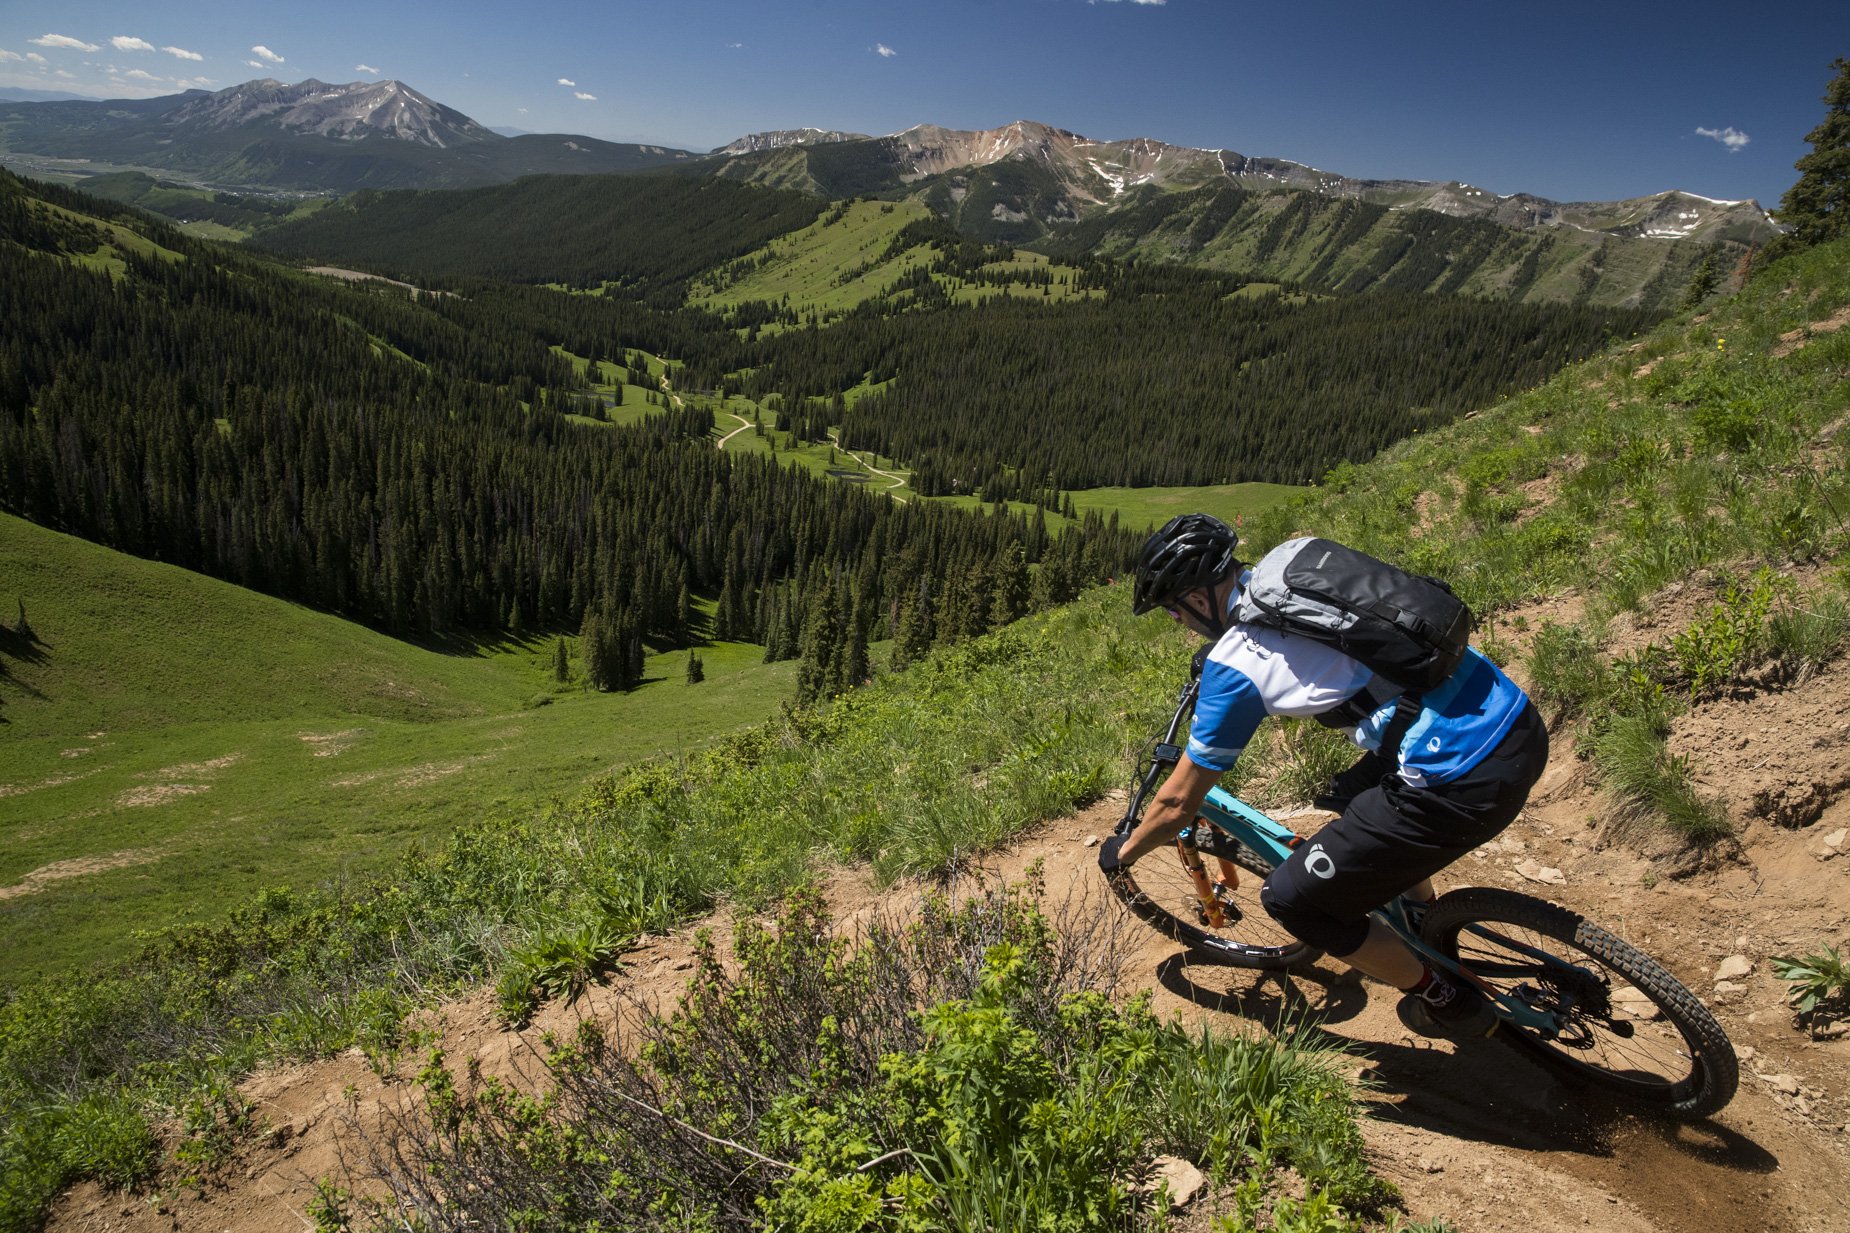 Shimano XTR 2019 Crested Butte